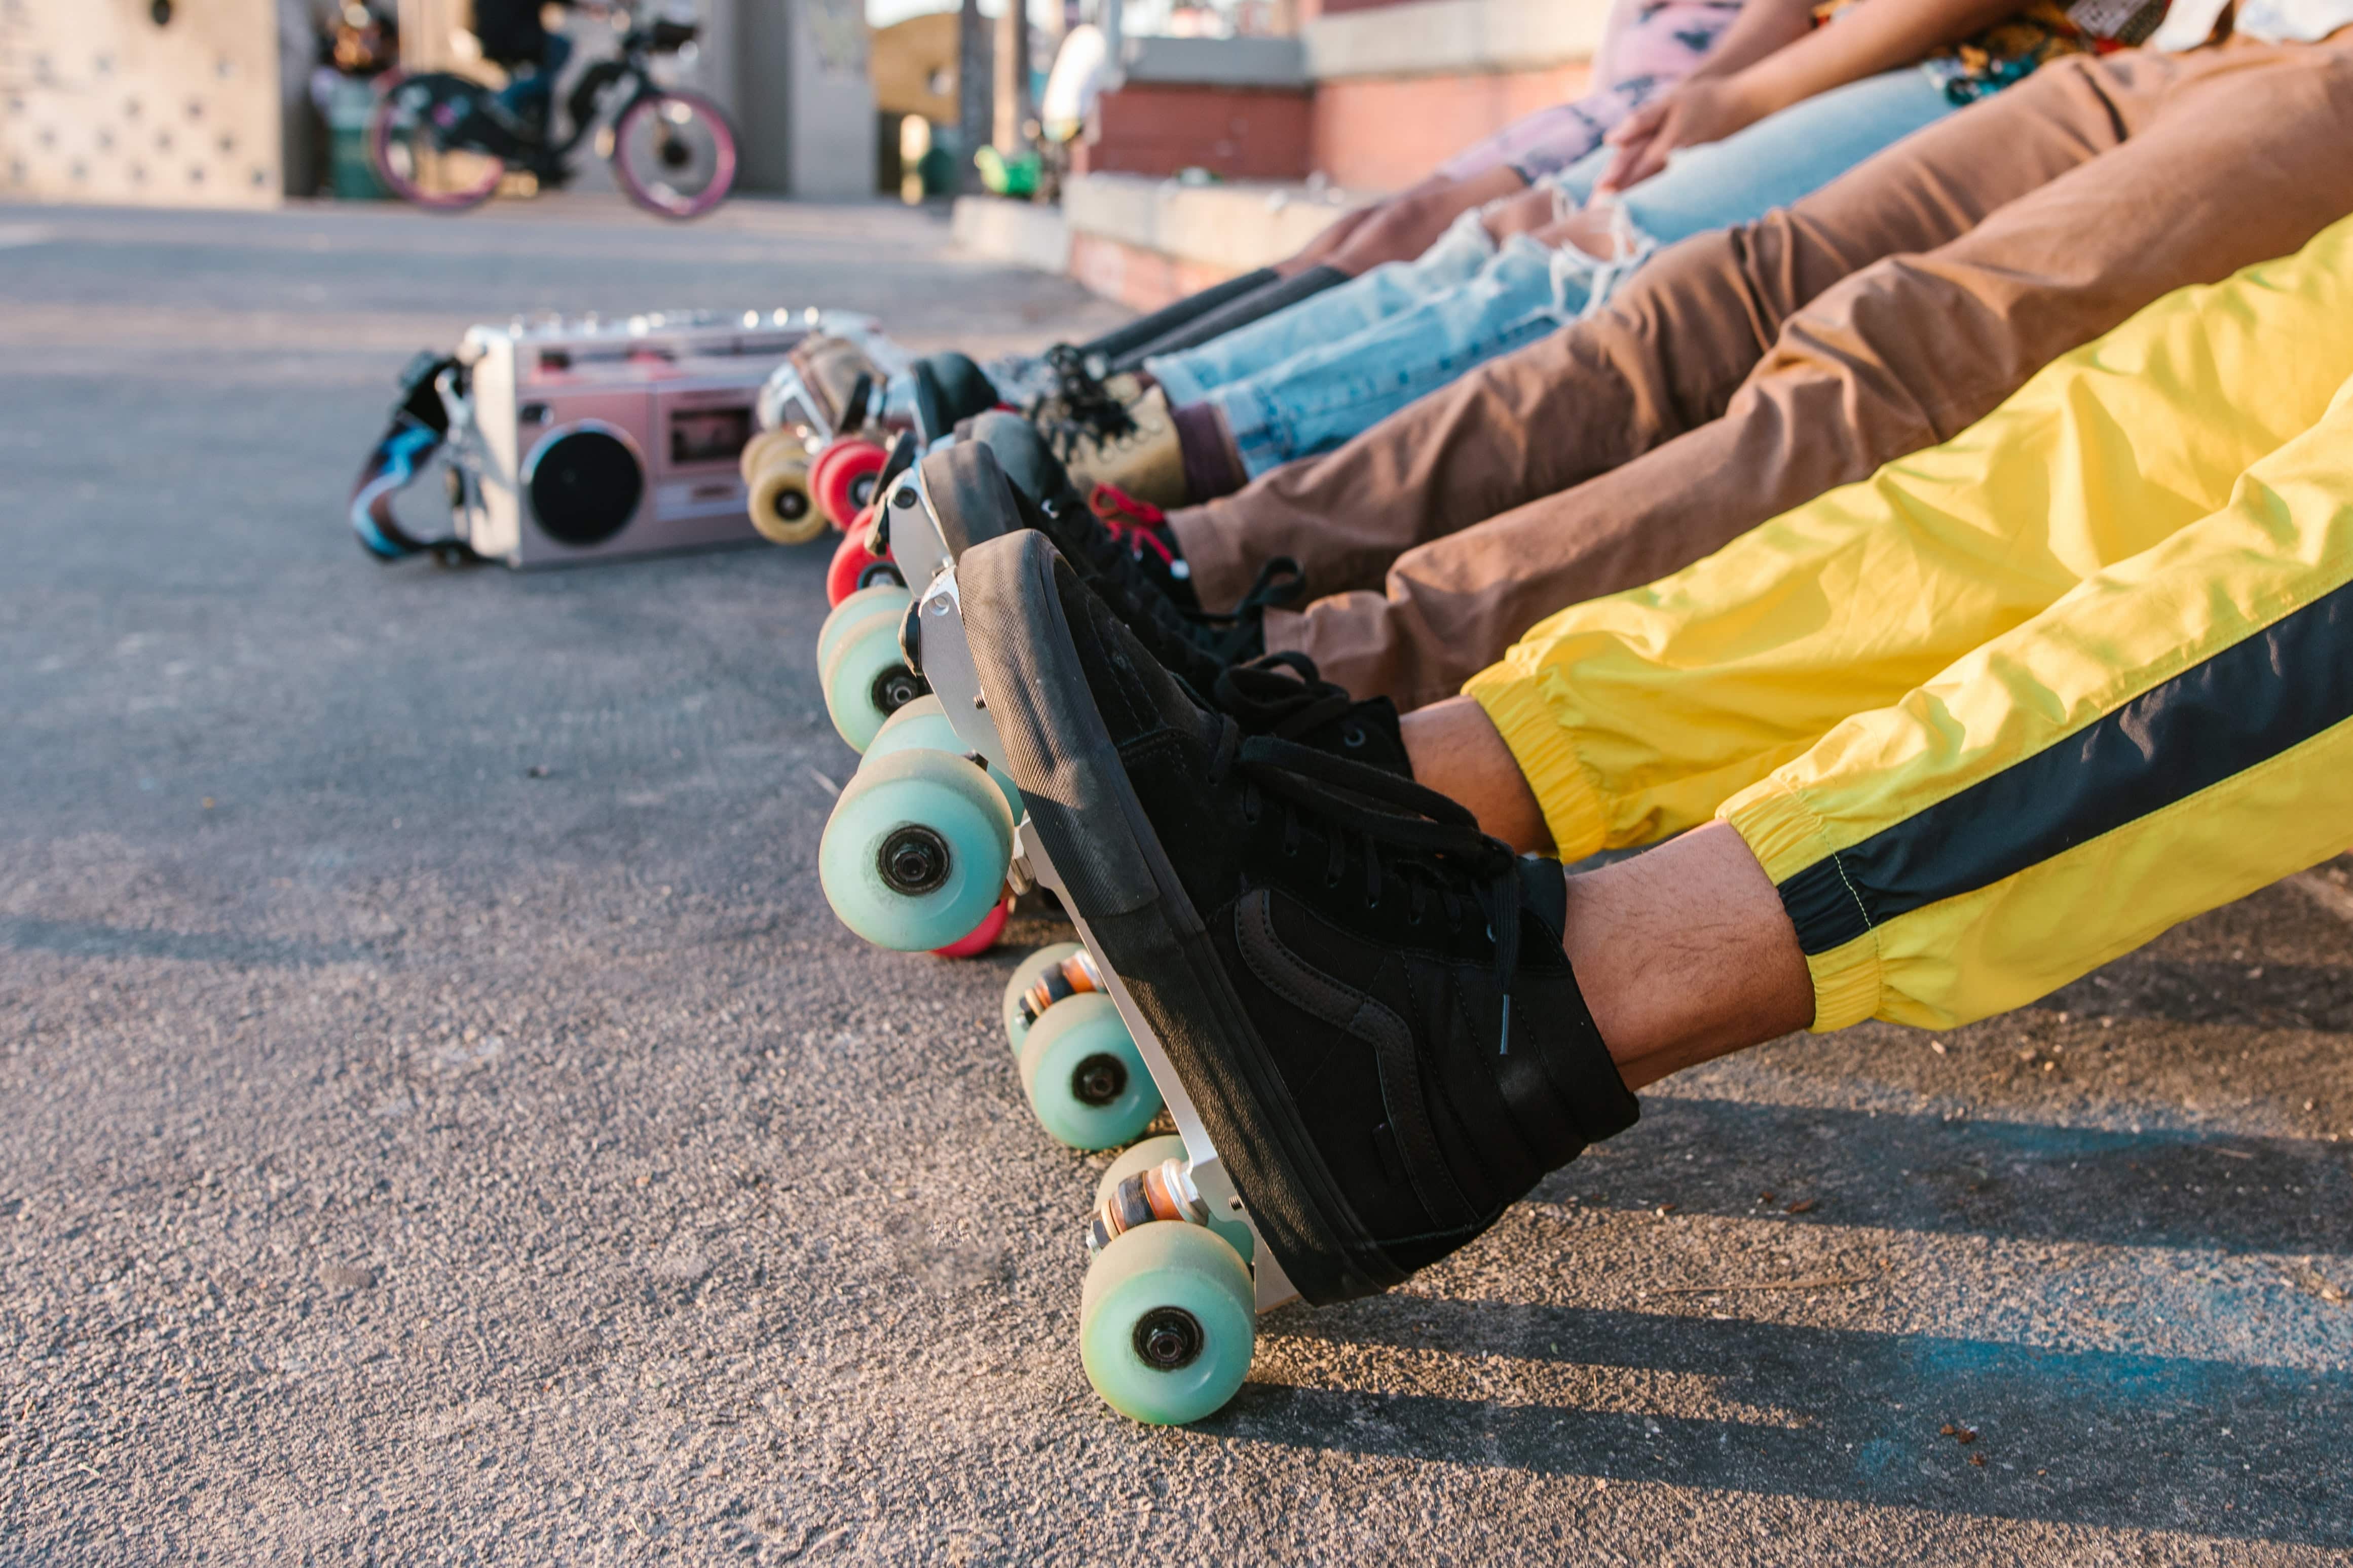 A photo showing a lineup of people's legs wearing roller skates on pavement. 